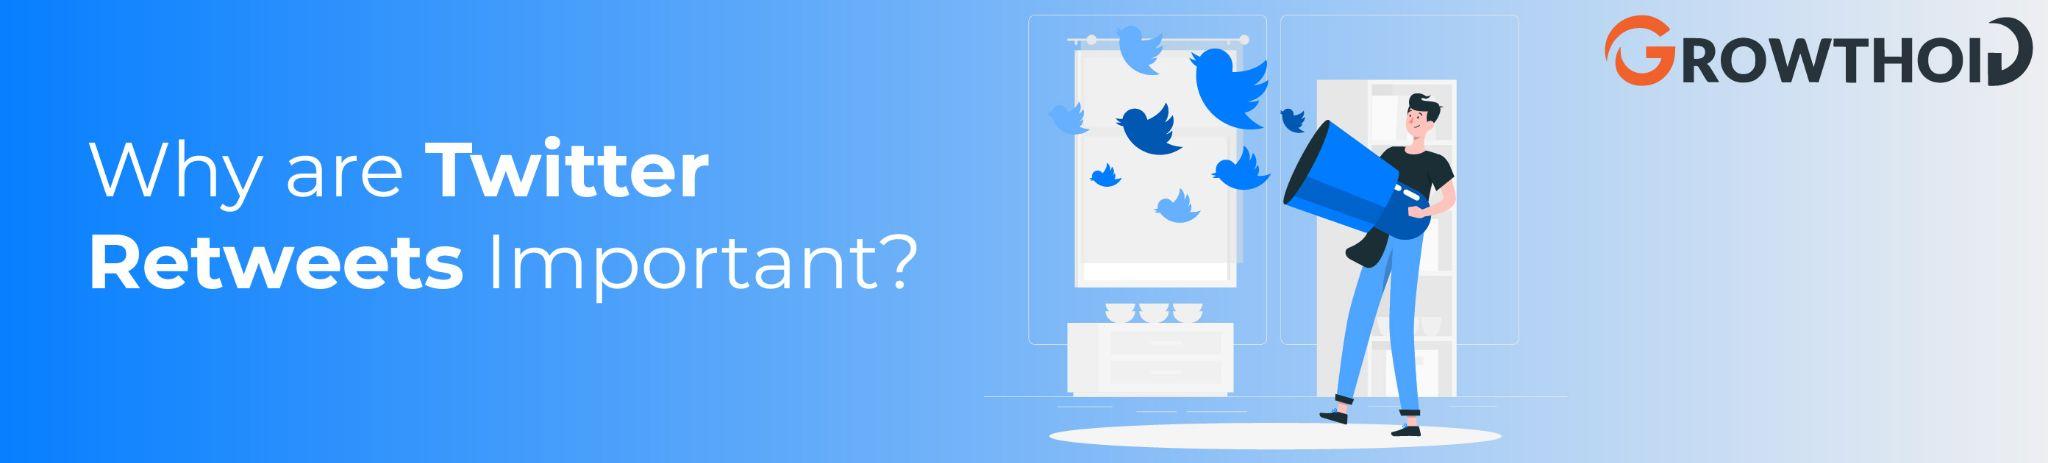 Why are Twitter Retweets Important?